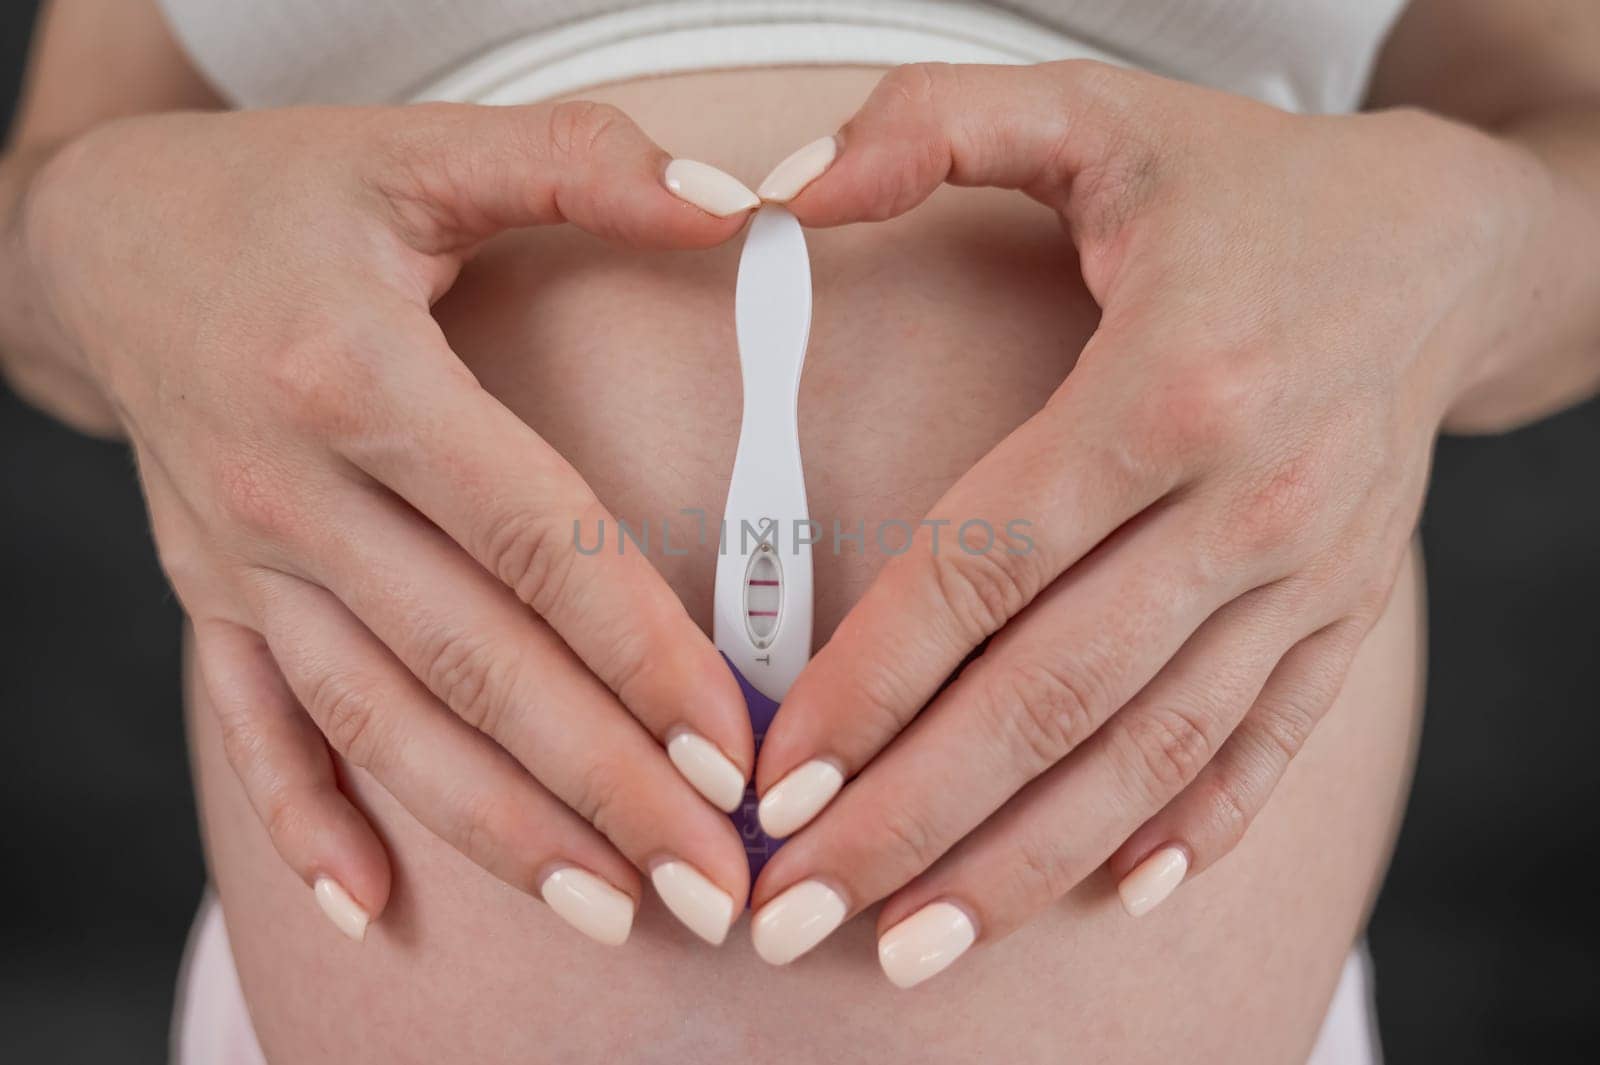 Caucasian woman holding a positive express pregnancy test against the background of her tummy